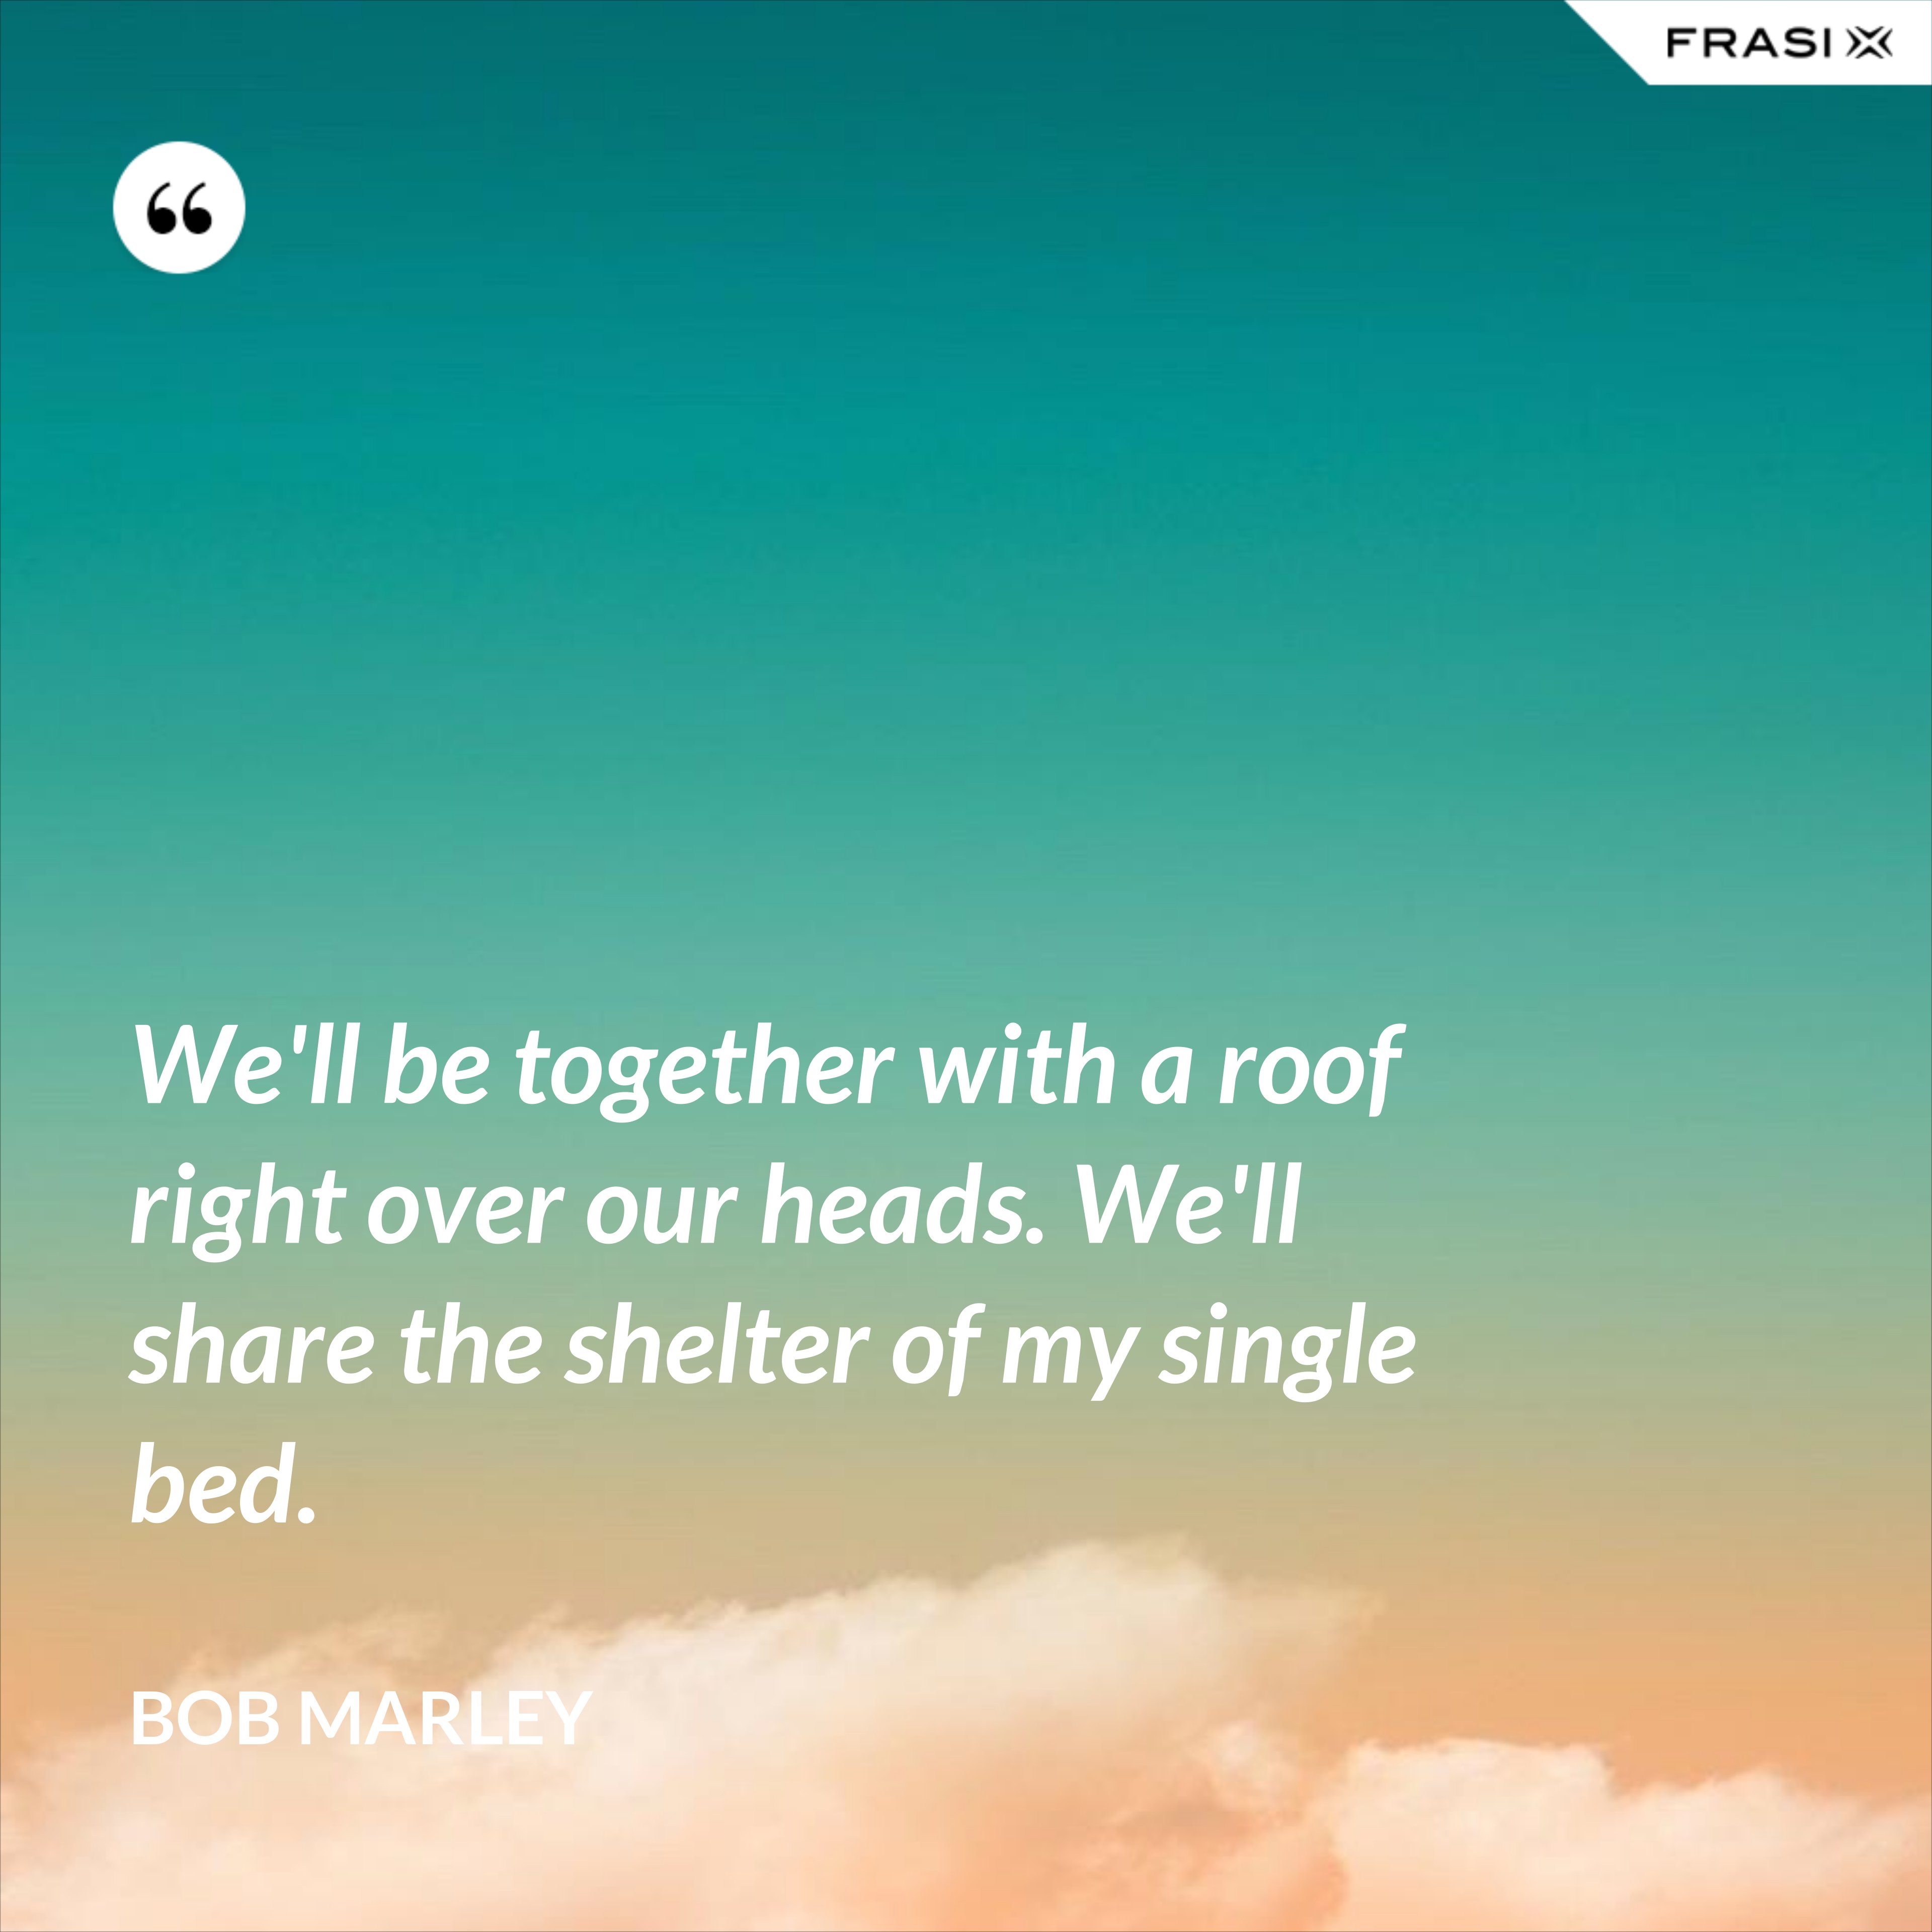 We'll be together with a roof right over our heads. We'll share the shelter of my single bed. - Bob Marley